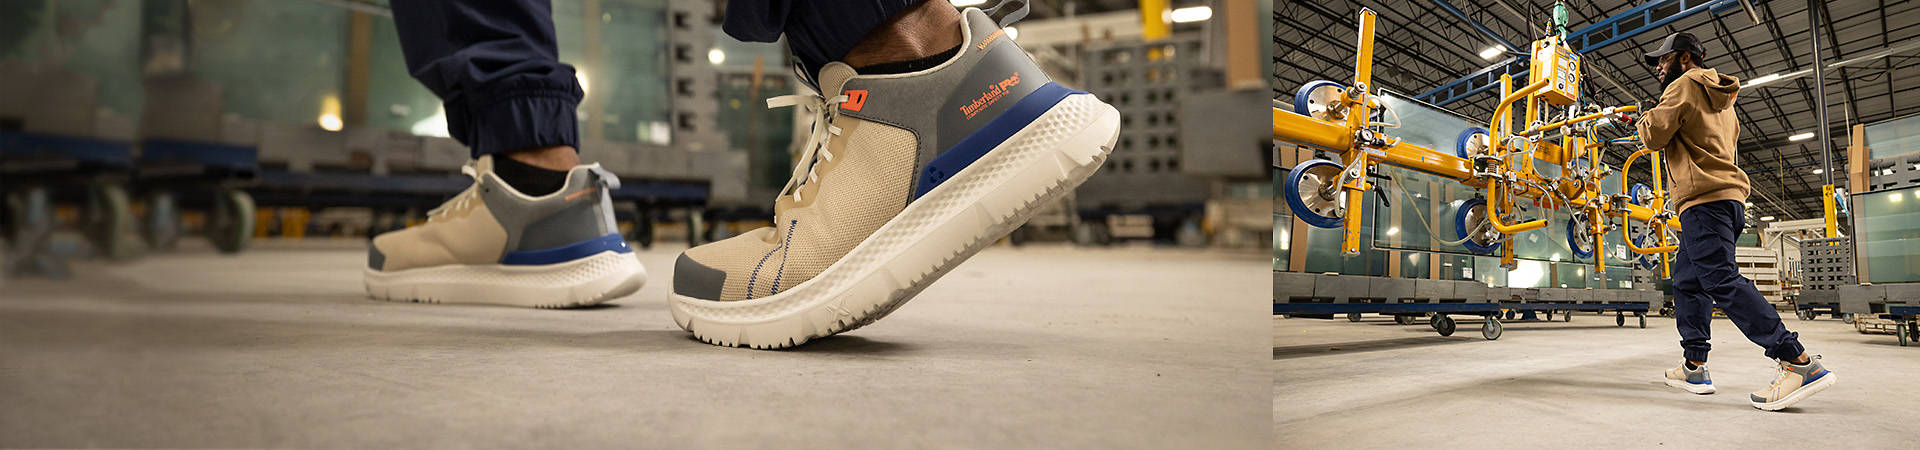 Image collage of warehouse workers on concrete, with a closeup image of an off-white and gray Timberland work sneaker which shows its thick soles and treads.